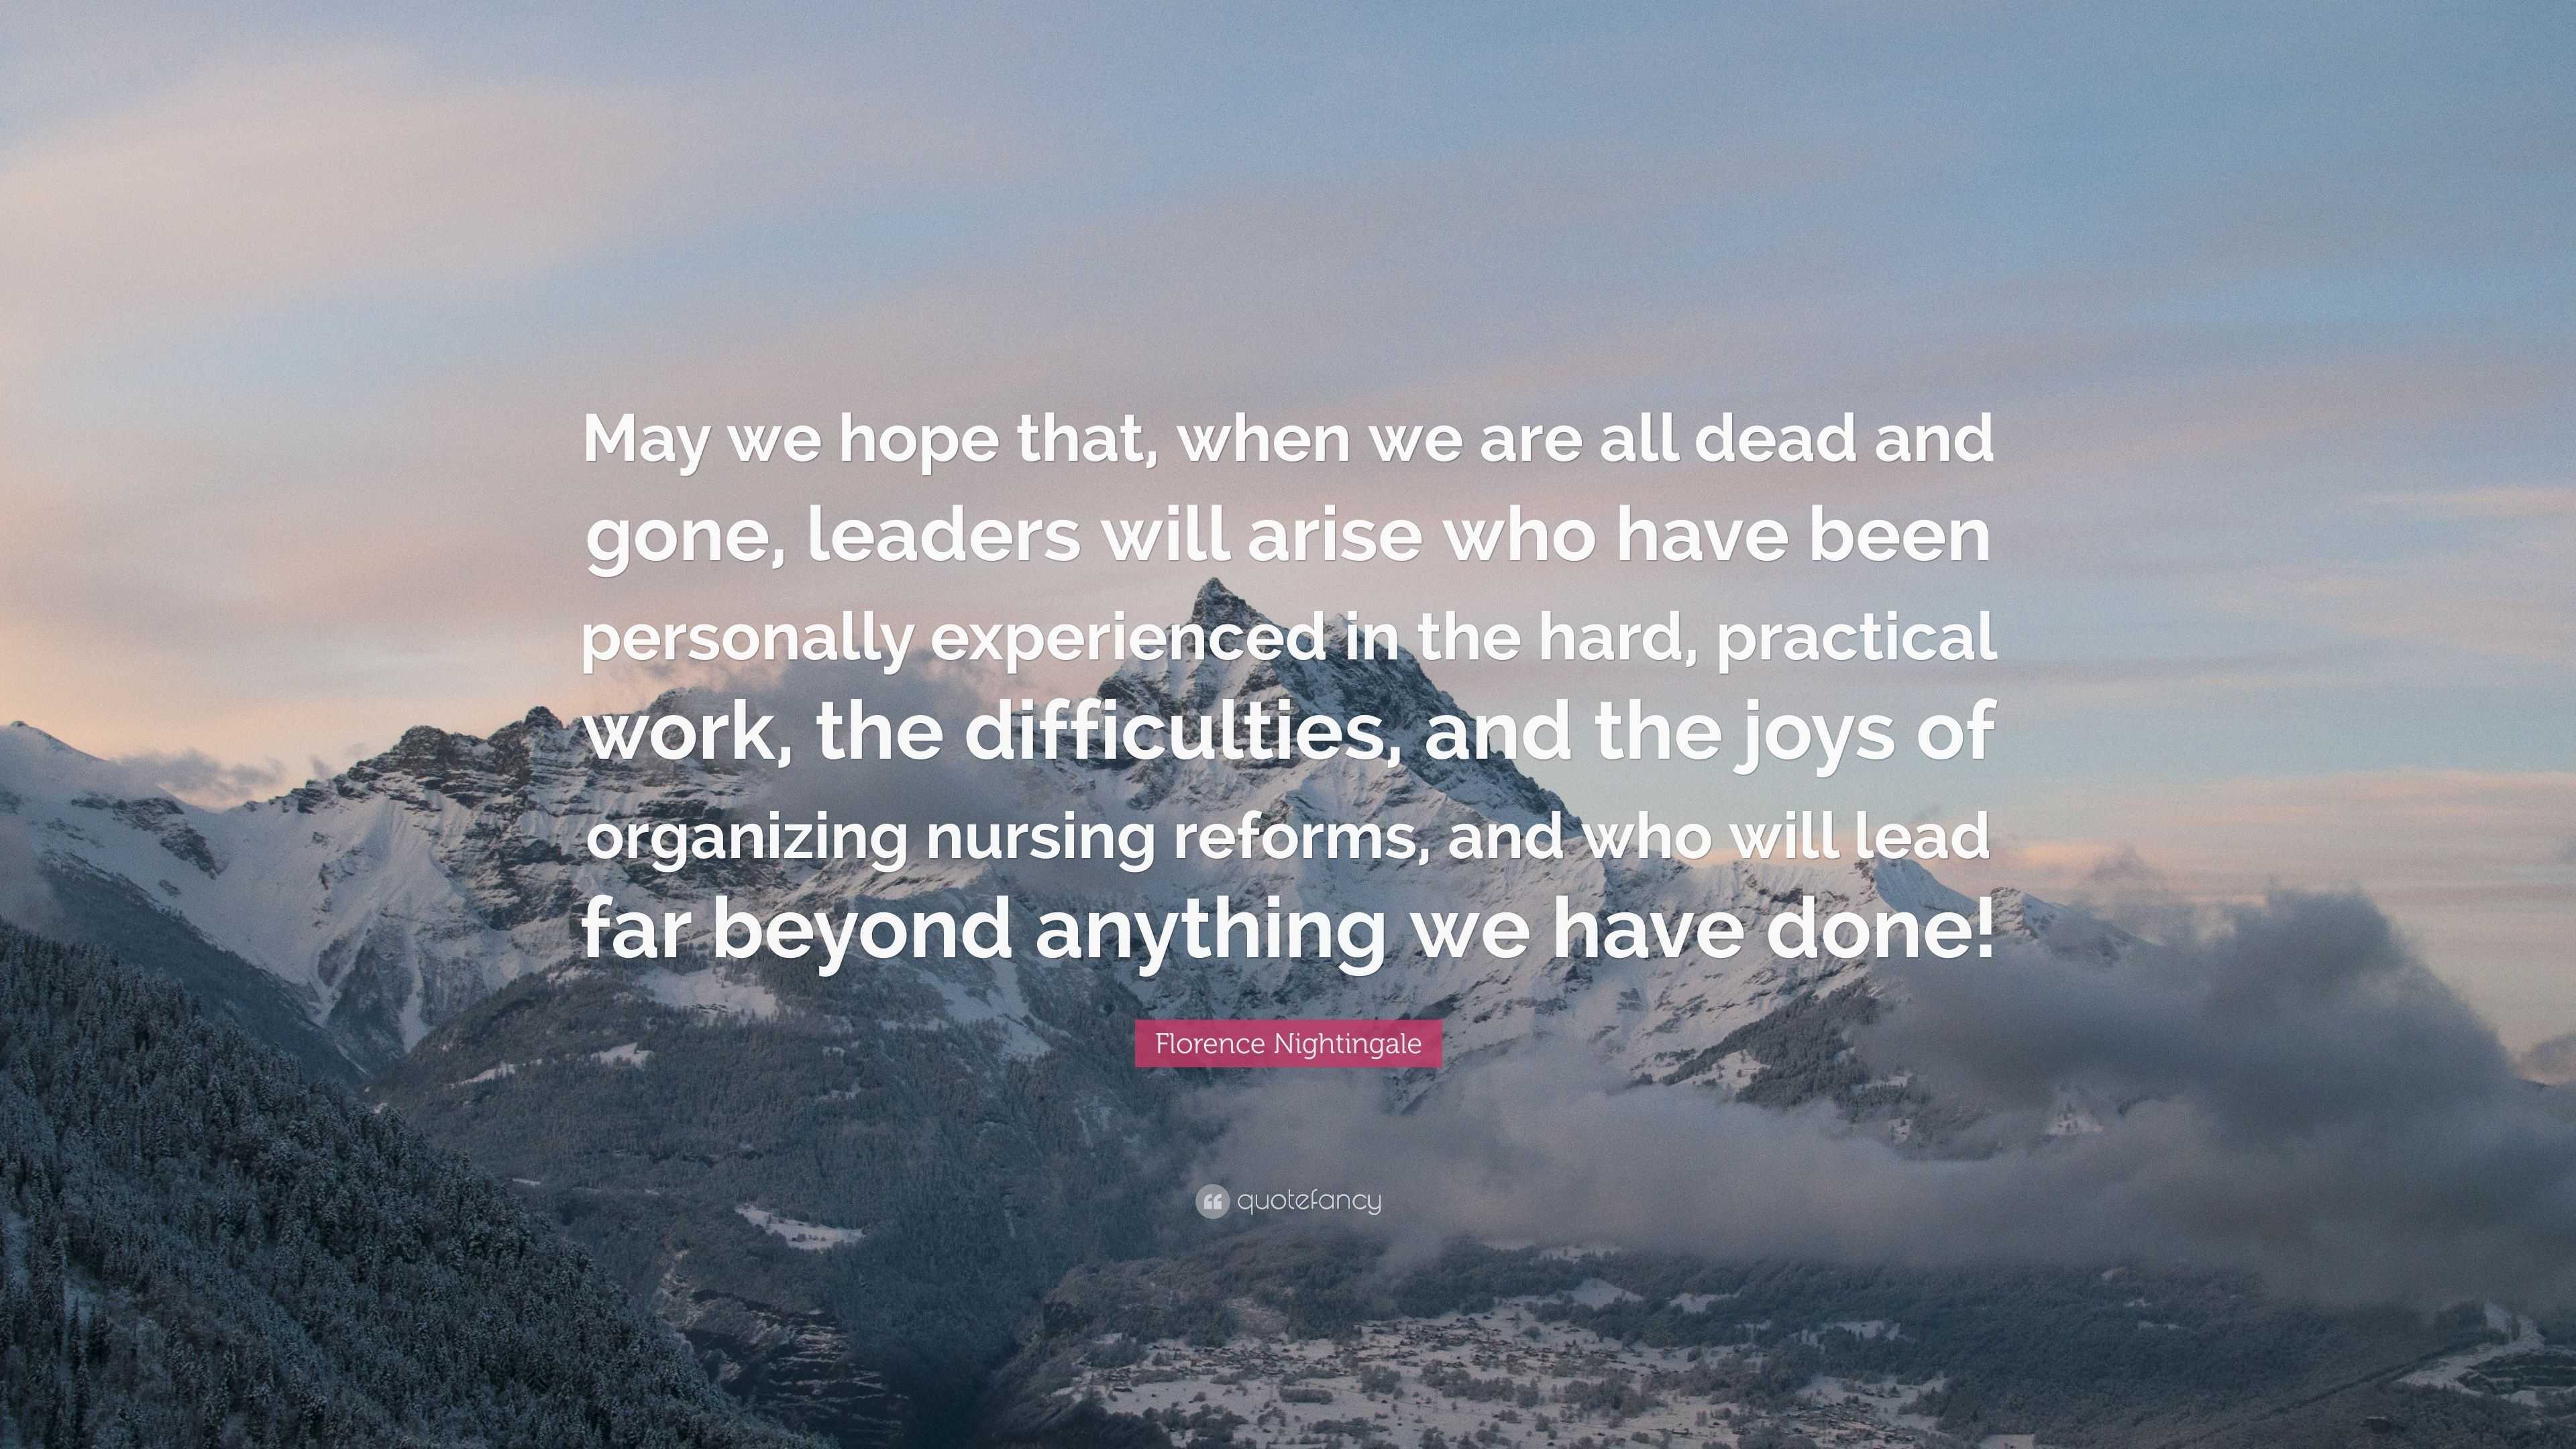 Florence Nightingale Quote: “May we hope that, when we are all dead and ...